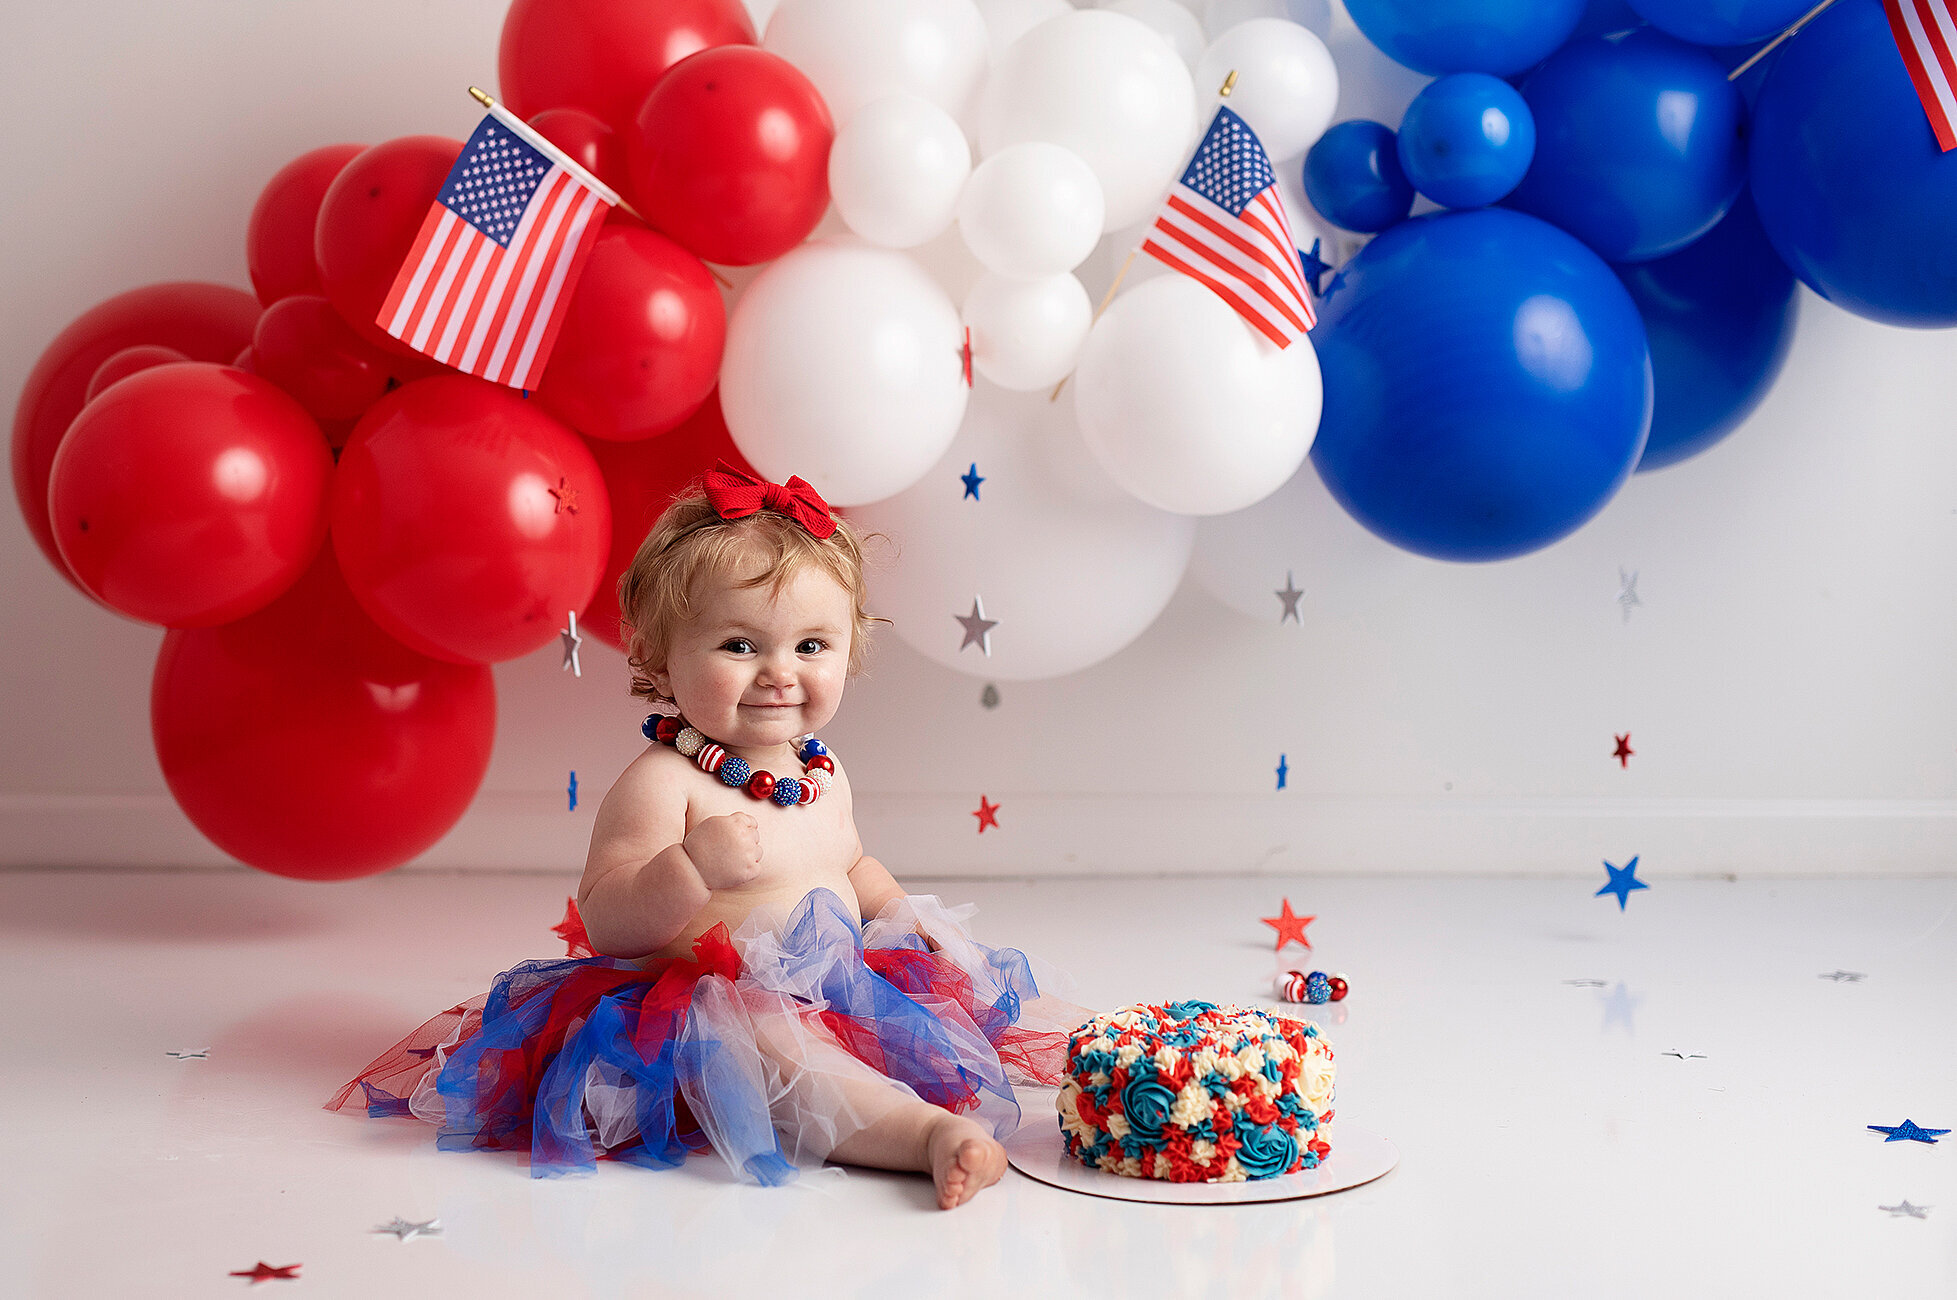 One year sitting with red, white and blue cake and red, white, blue balloons in the background